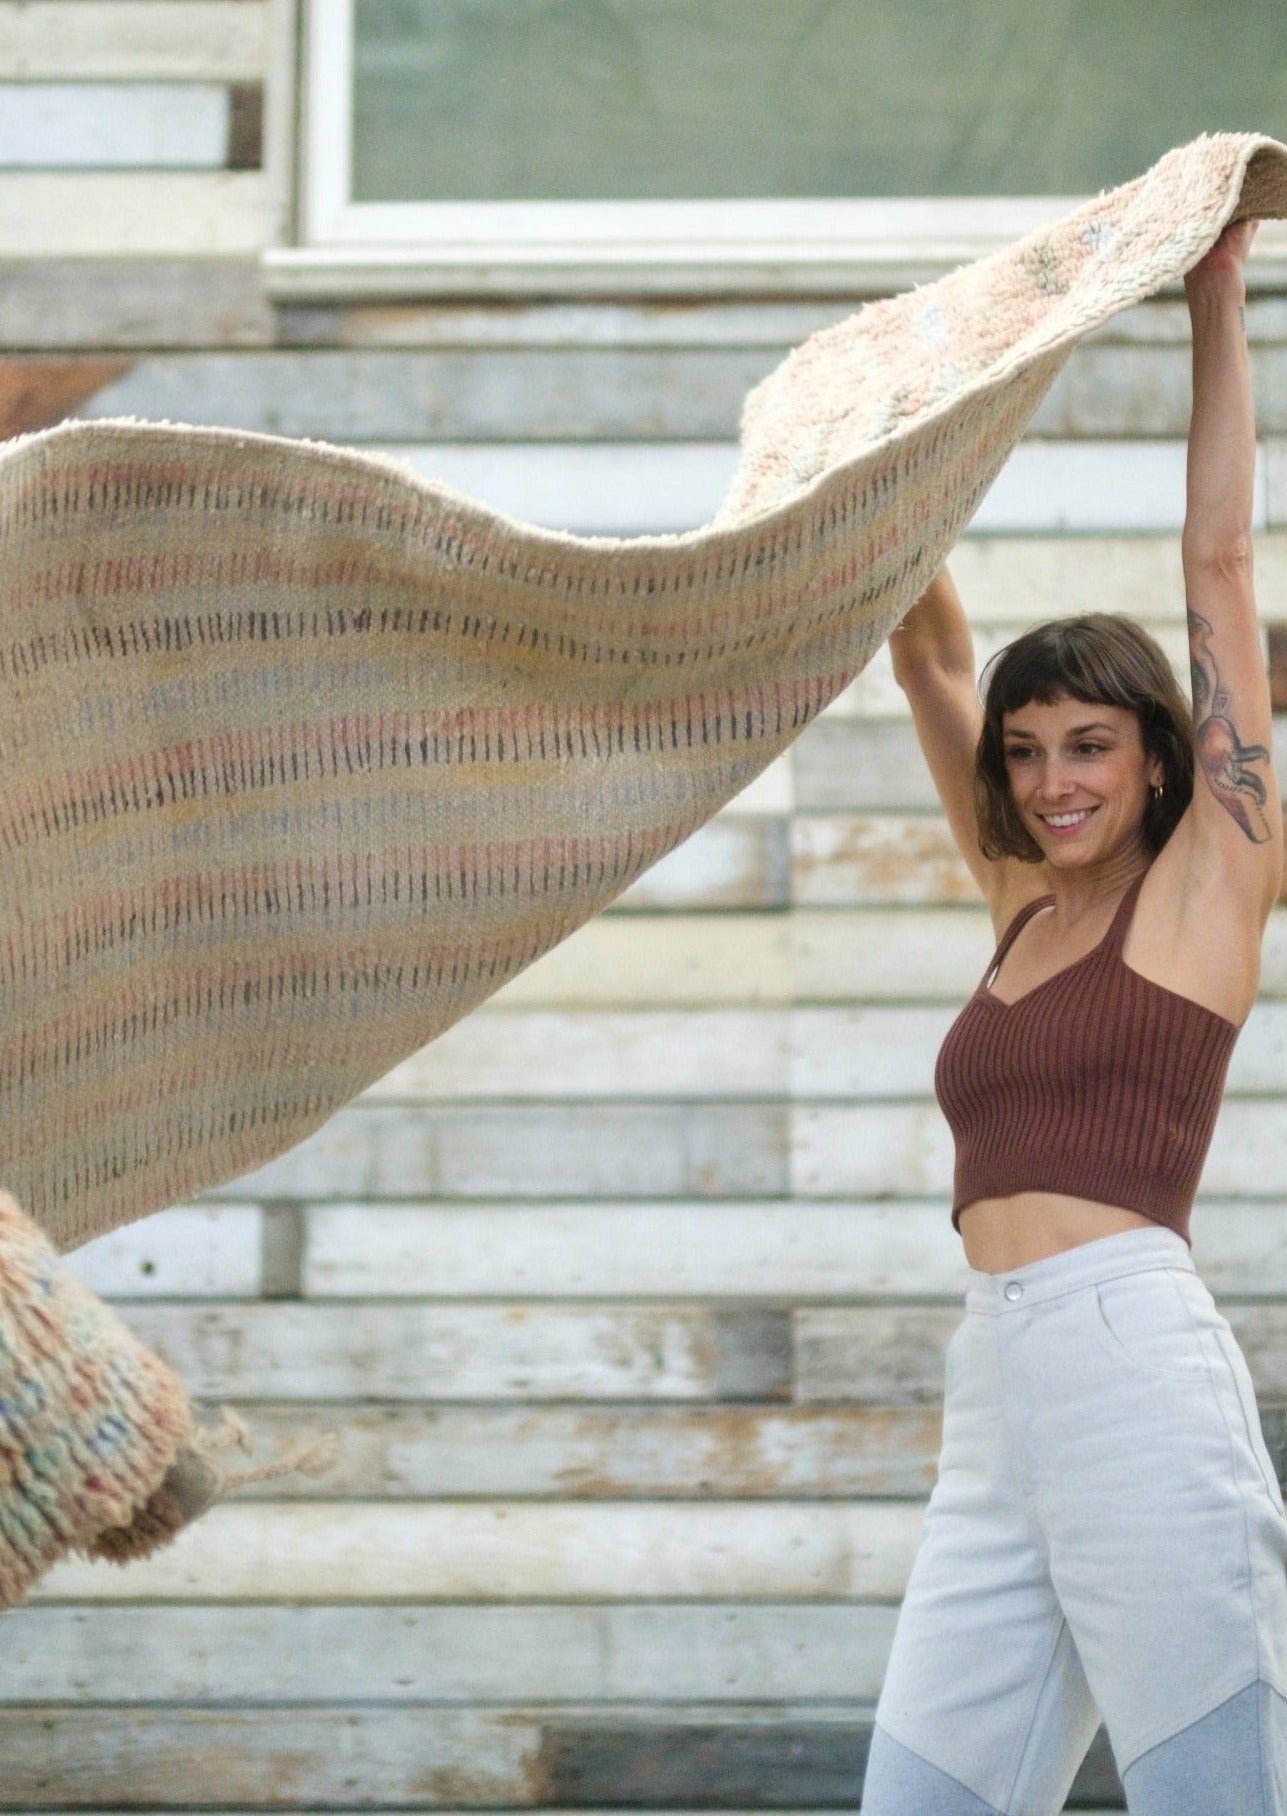 flying carpet feels as this girl rolls out her favorite runner woven by berber women. She is happy with short brown hair and bangs wearing soluna collective pants and top made from organic fibers. She is in a rustic boho barn with a tatoo on her left arm of a fox in motion 